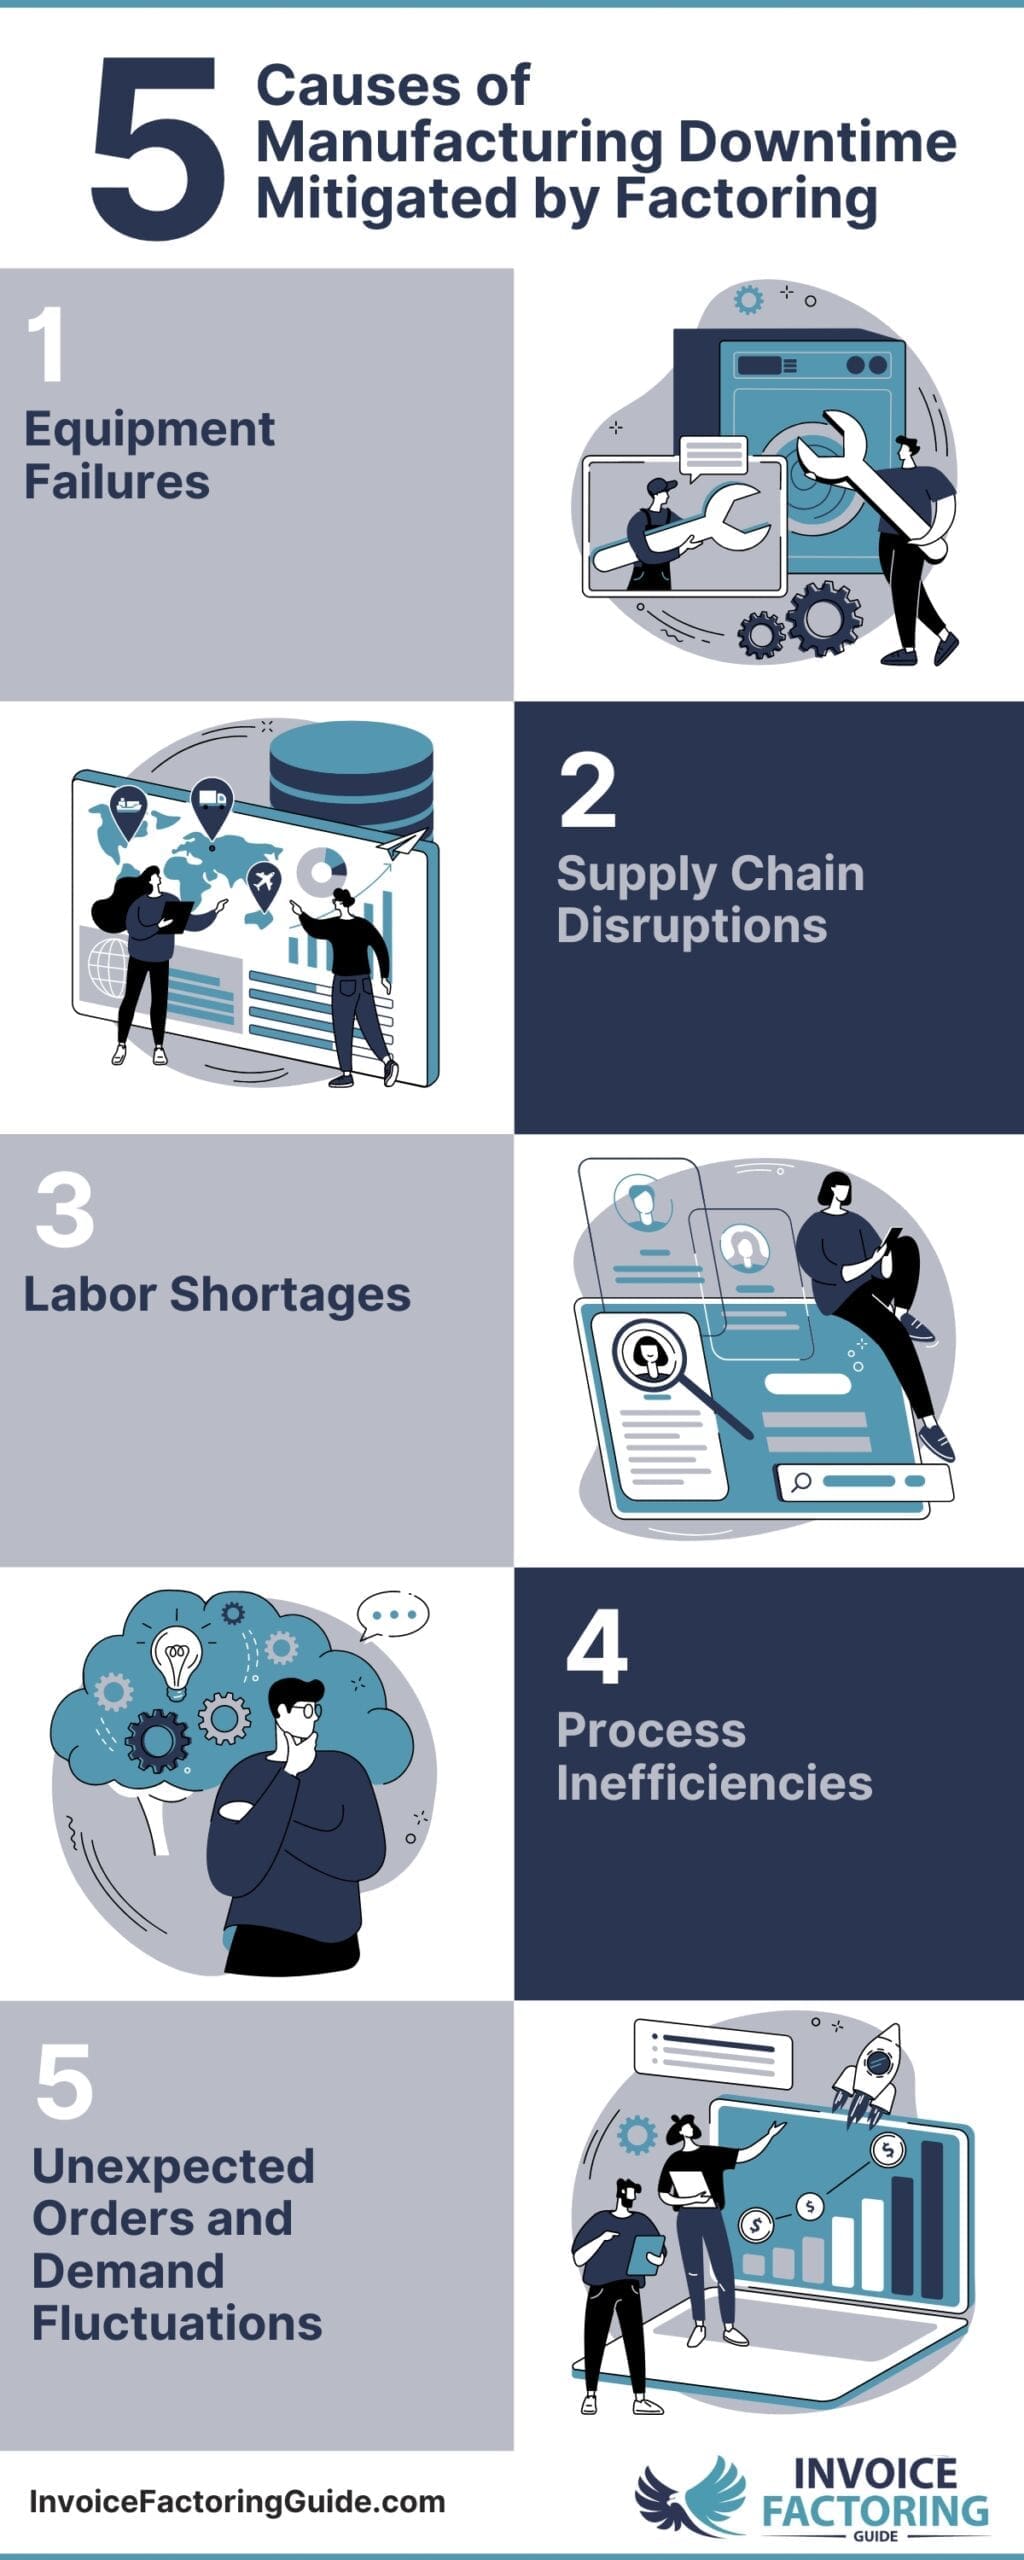 5 Top Causes of Manufacturing Downtime Factoring Mitigates Infographic